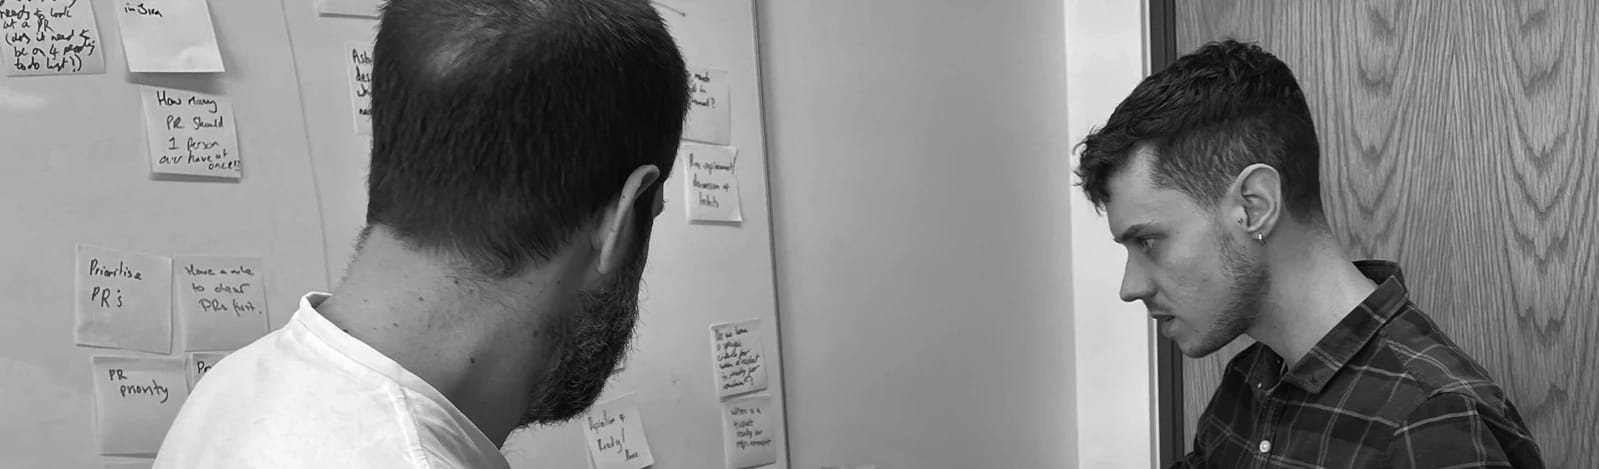 Photo of Chris during a workshop, reviewing post-its on a whiteboard.